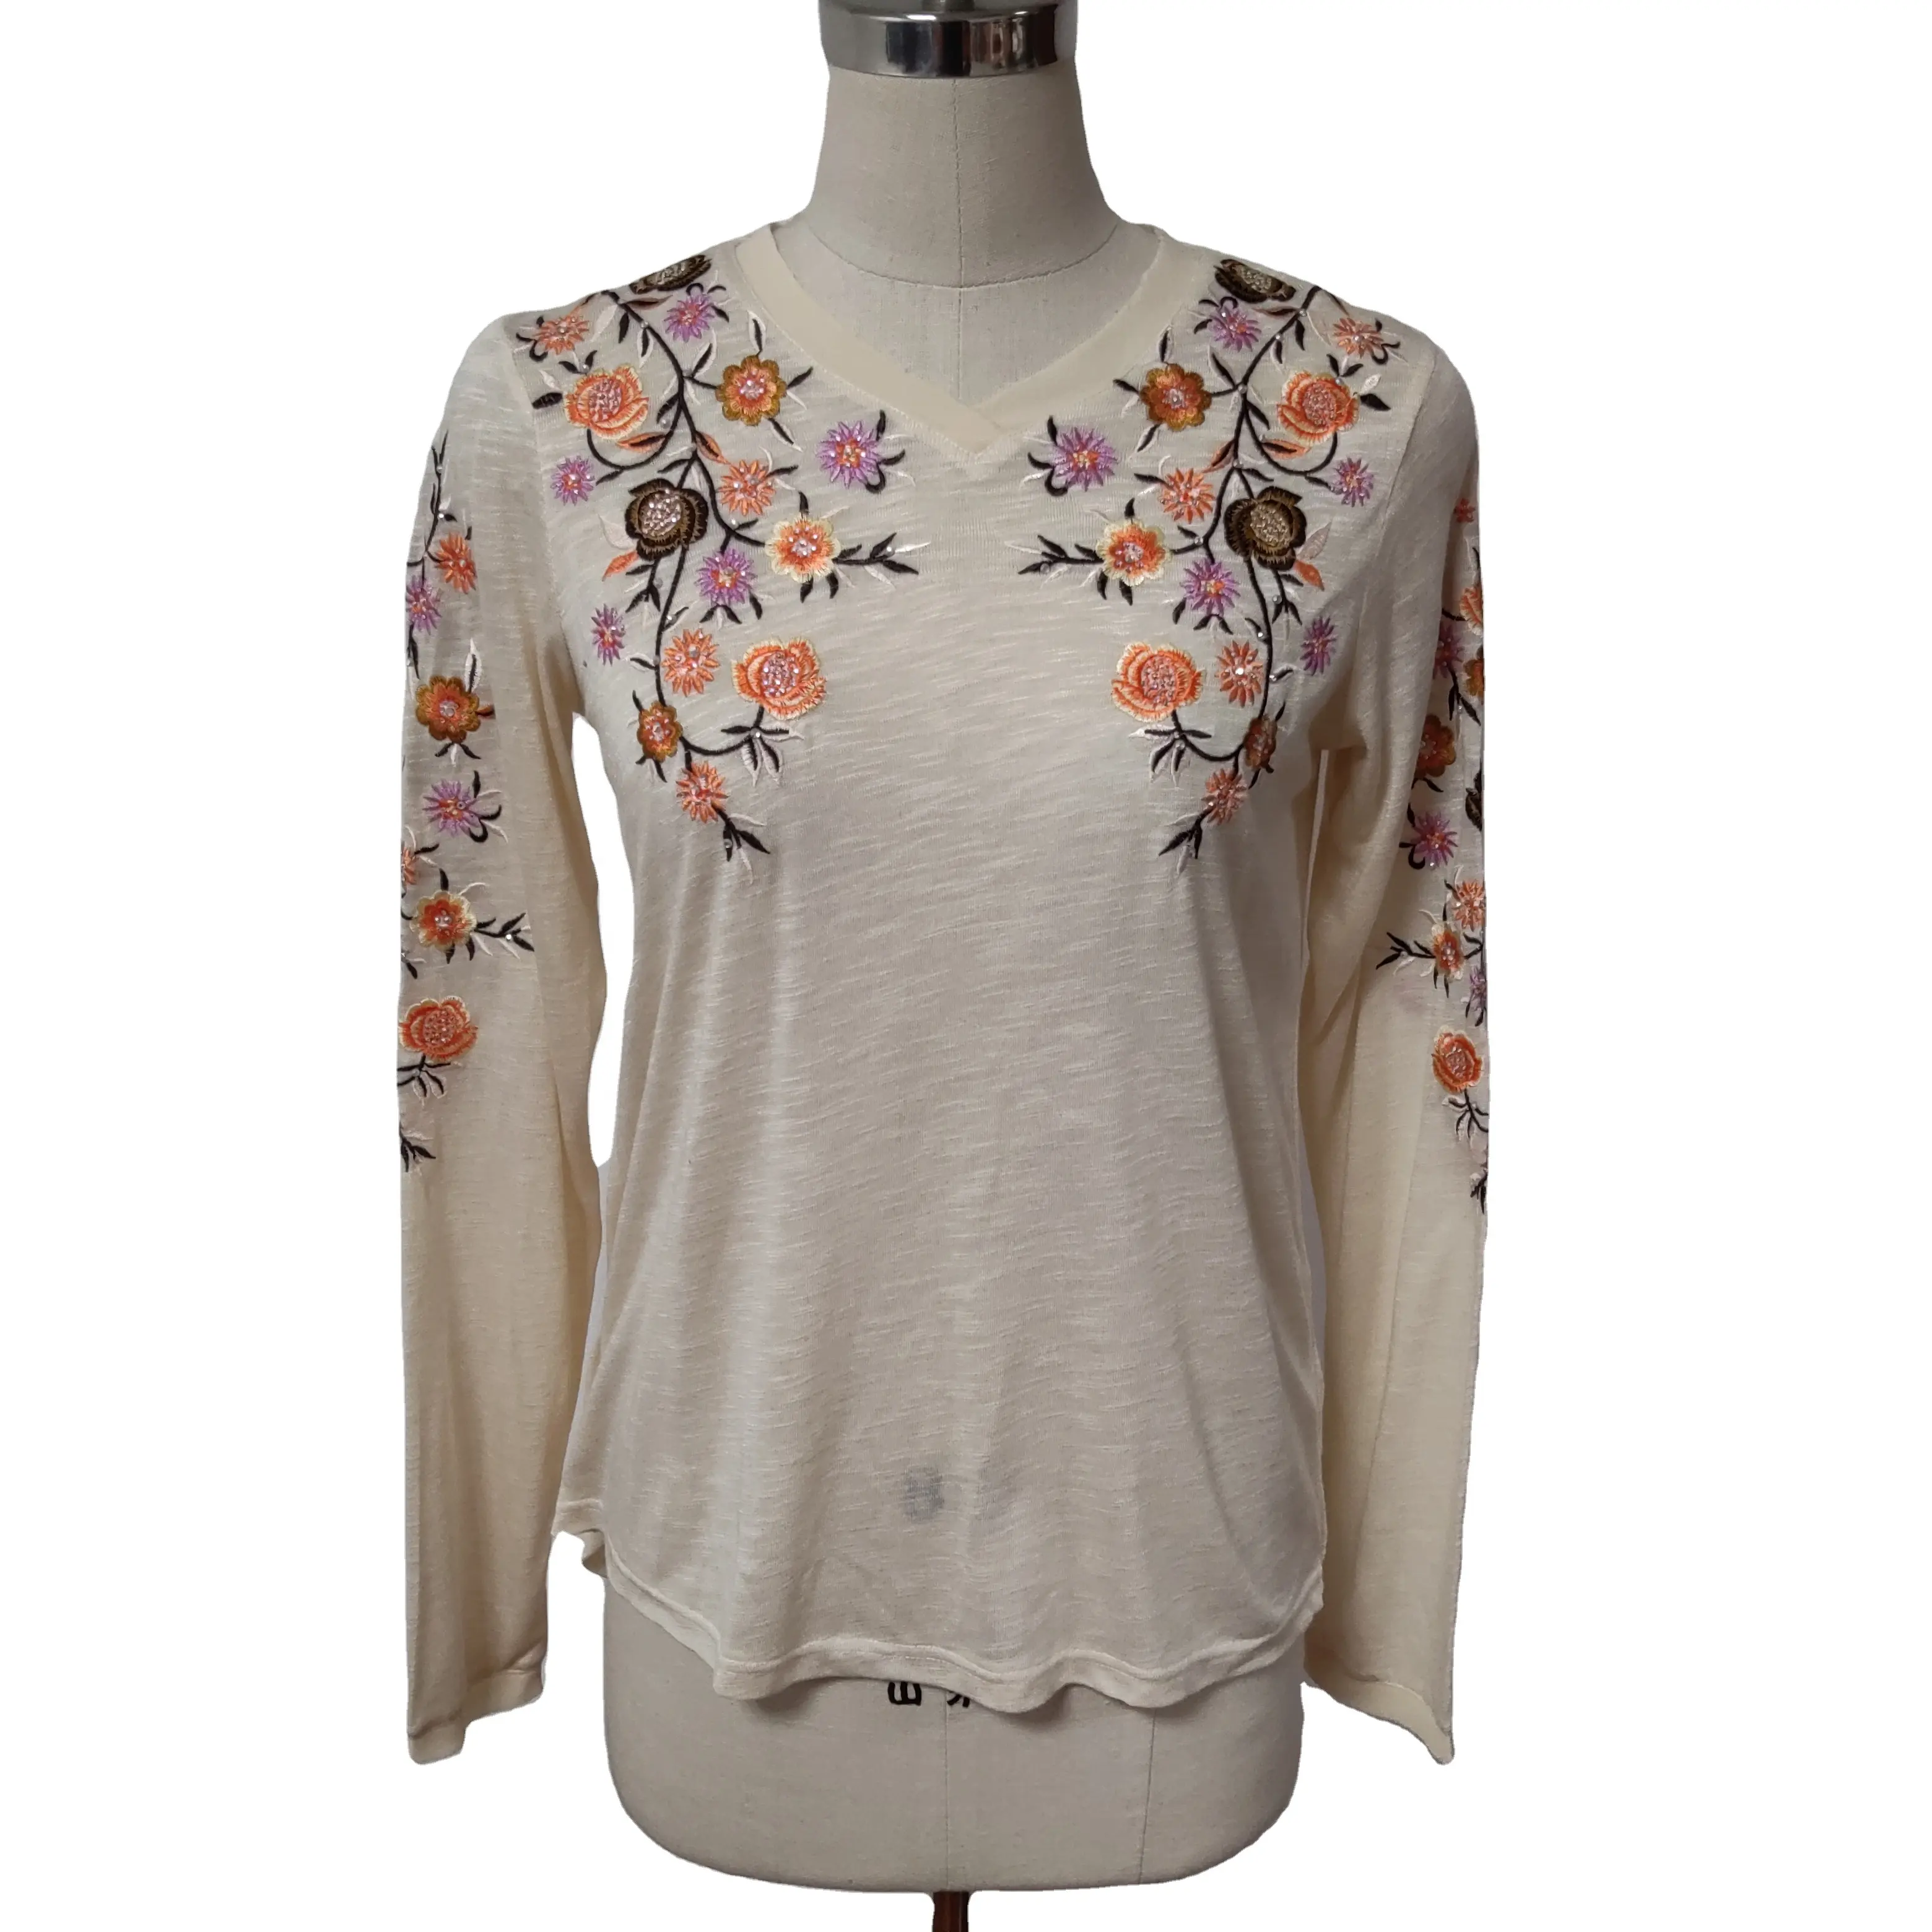 Spring Autumn Casual Fashion T Shirt For Women V Neck Chiffon Patch Long Sleeves Floral Embroidery Women's T-shirts